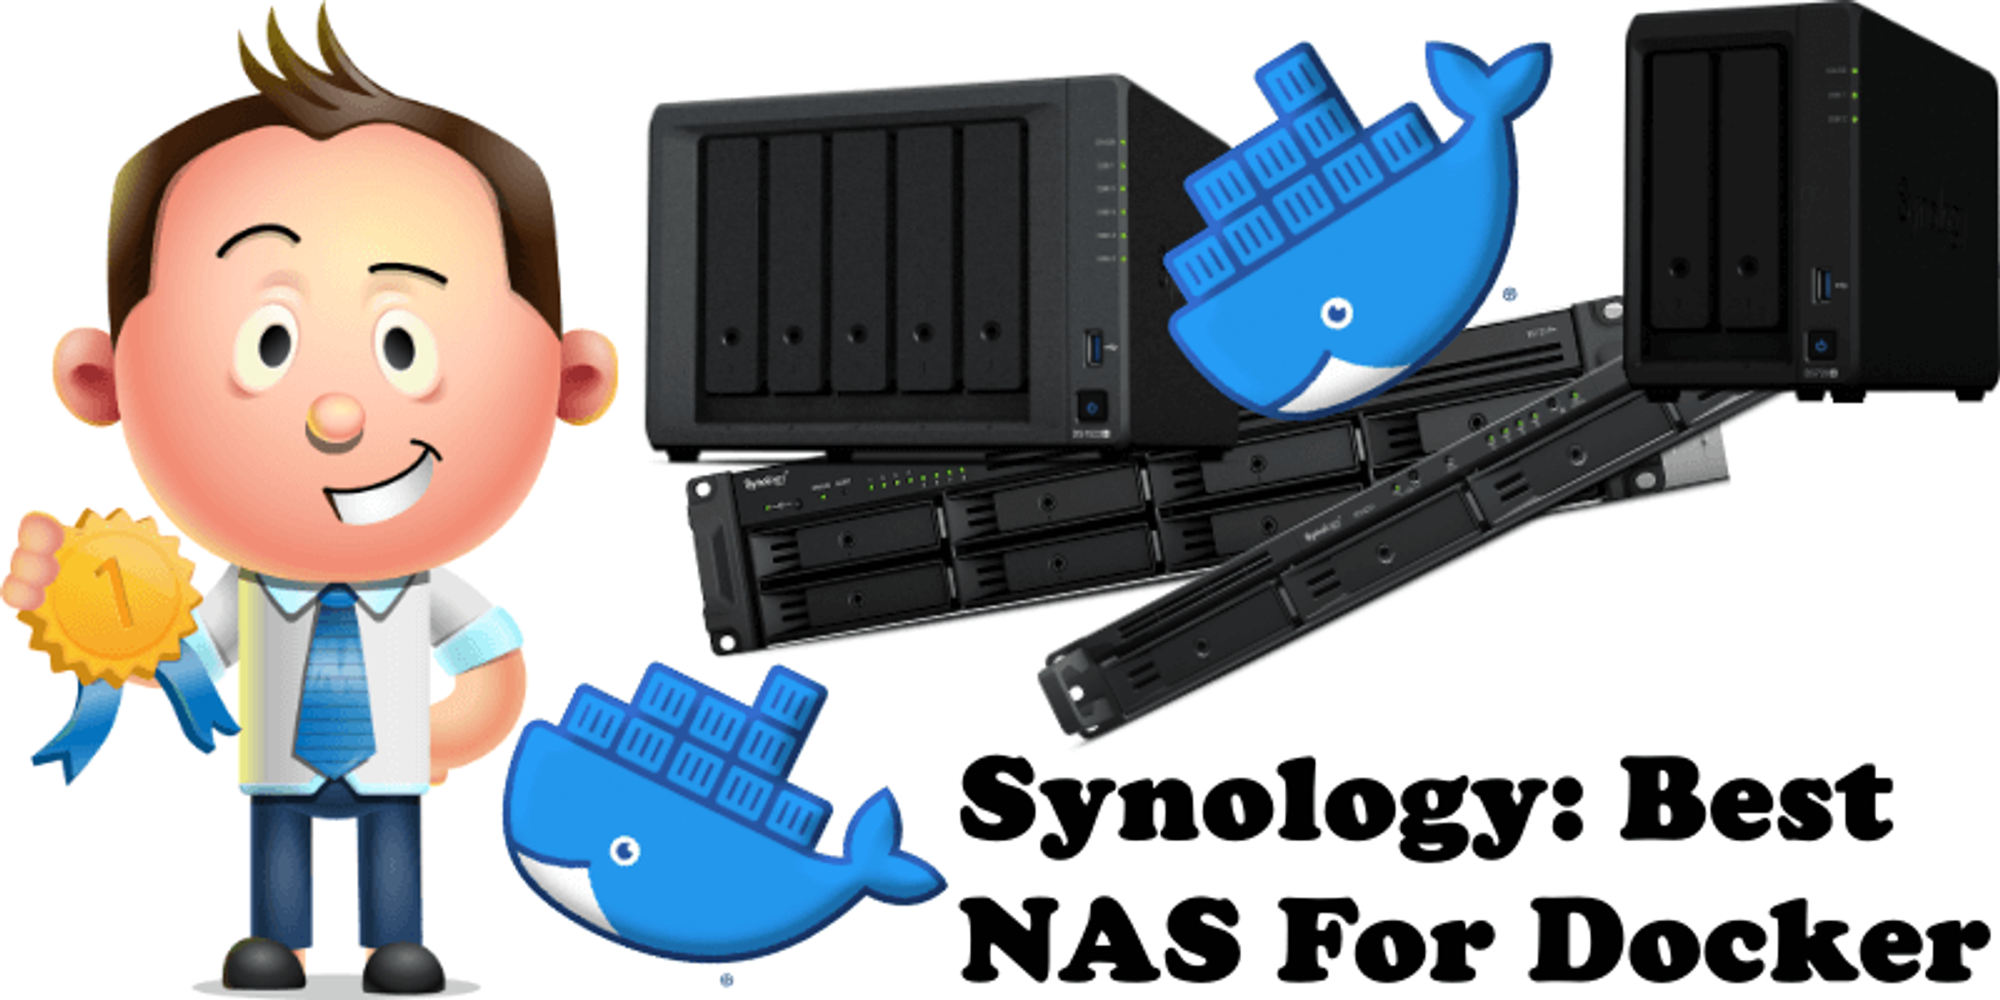 Synology: DS723+ Release Date and Specs – Marius Hosting